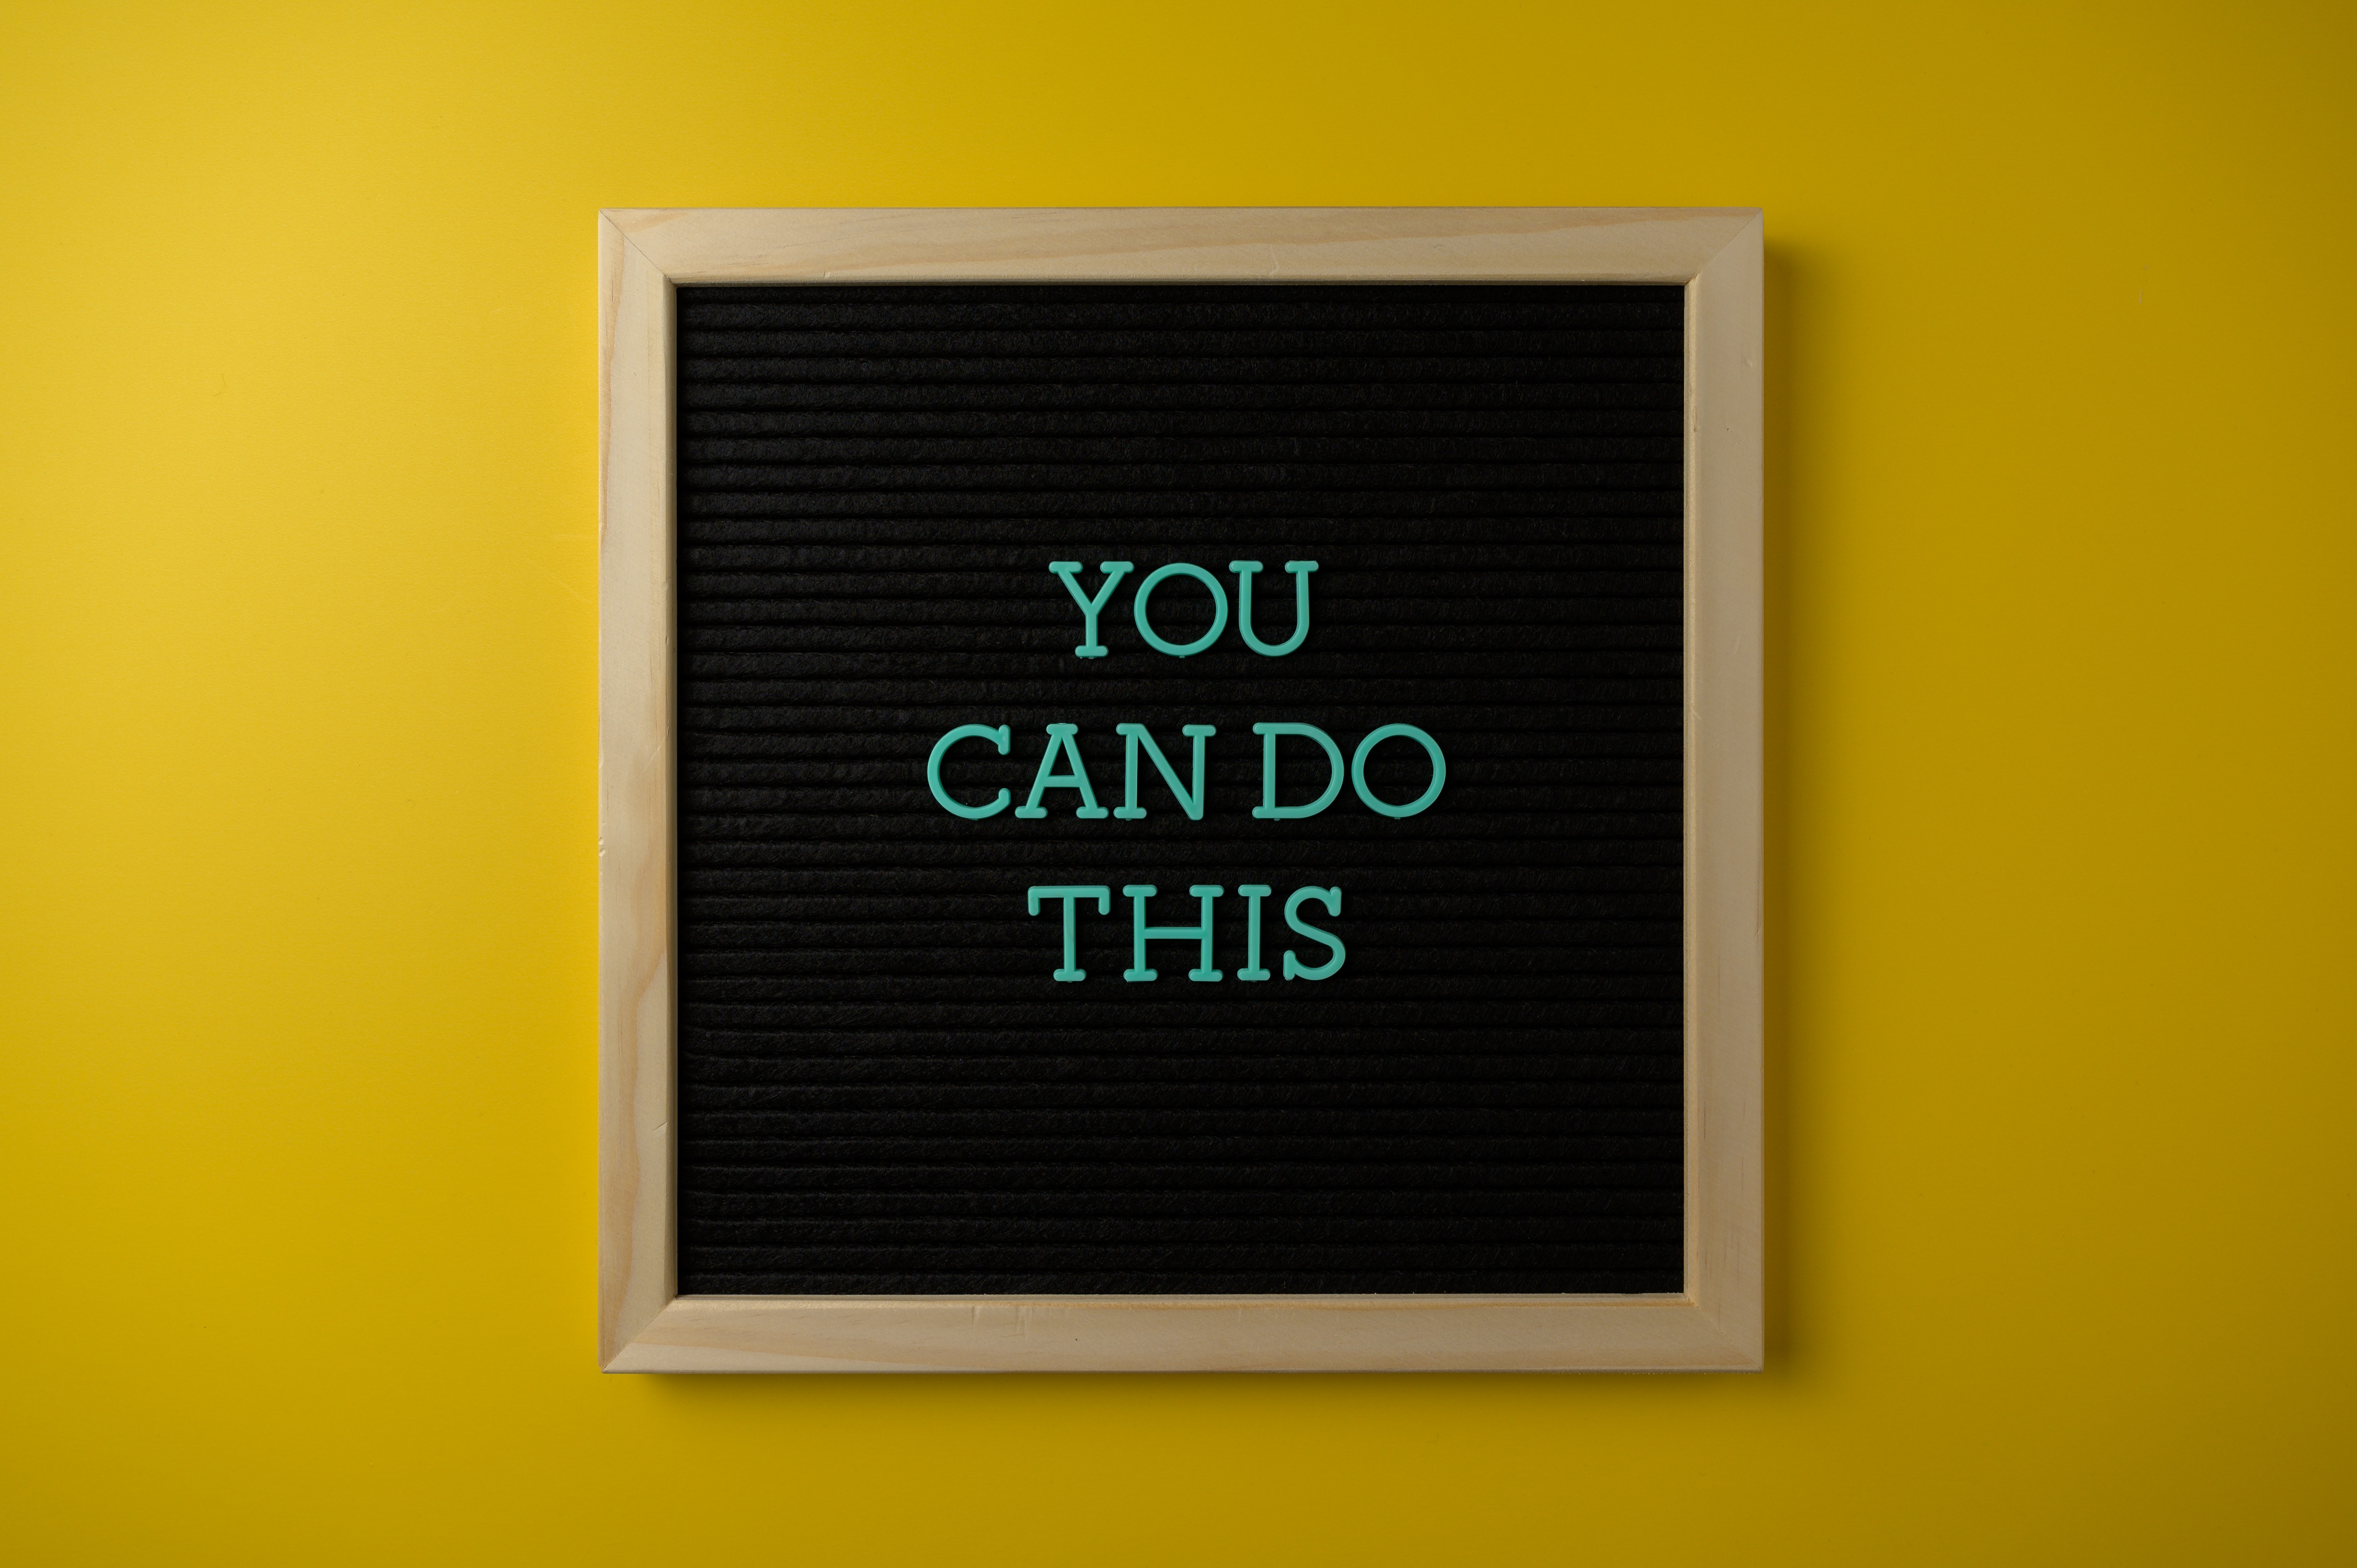  A sign reading "You can do this" on a yellow background 